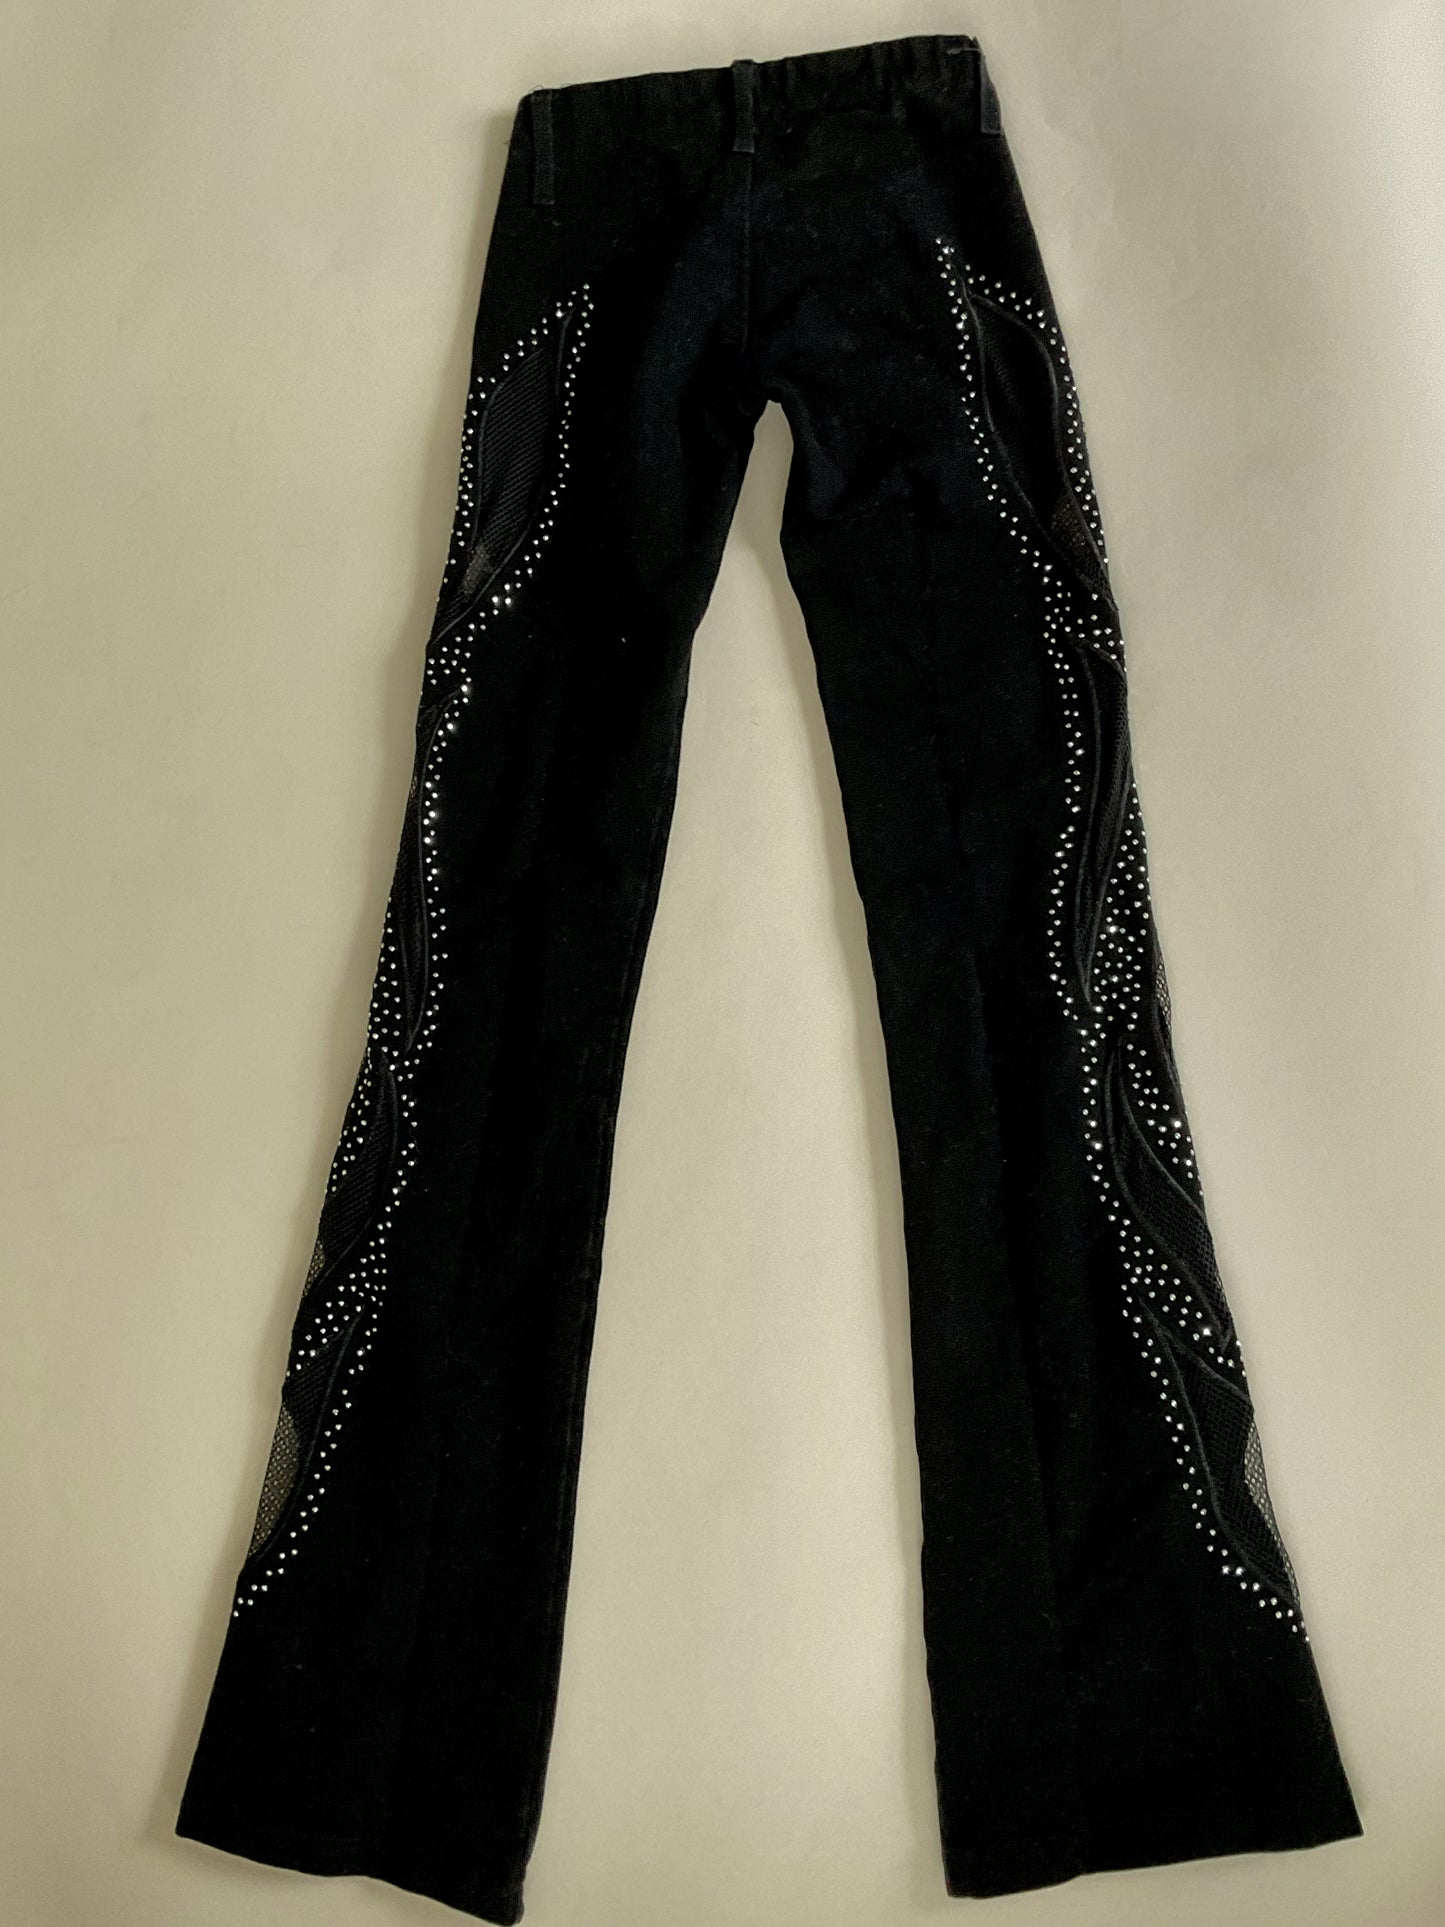 Vintage RARE Mesh and Bedazzled Pants